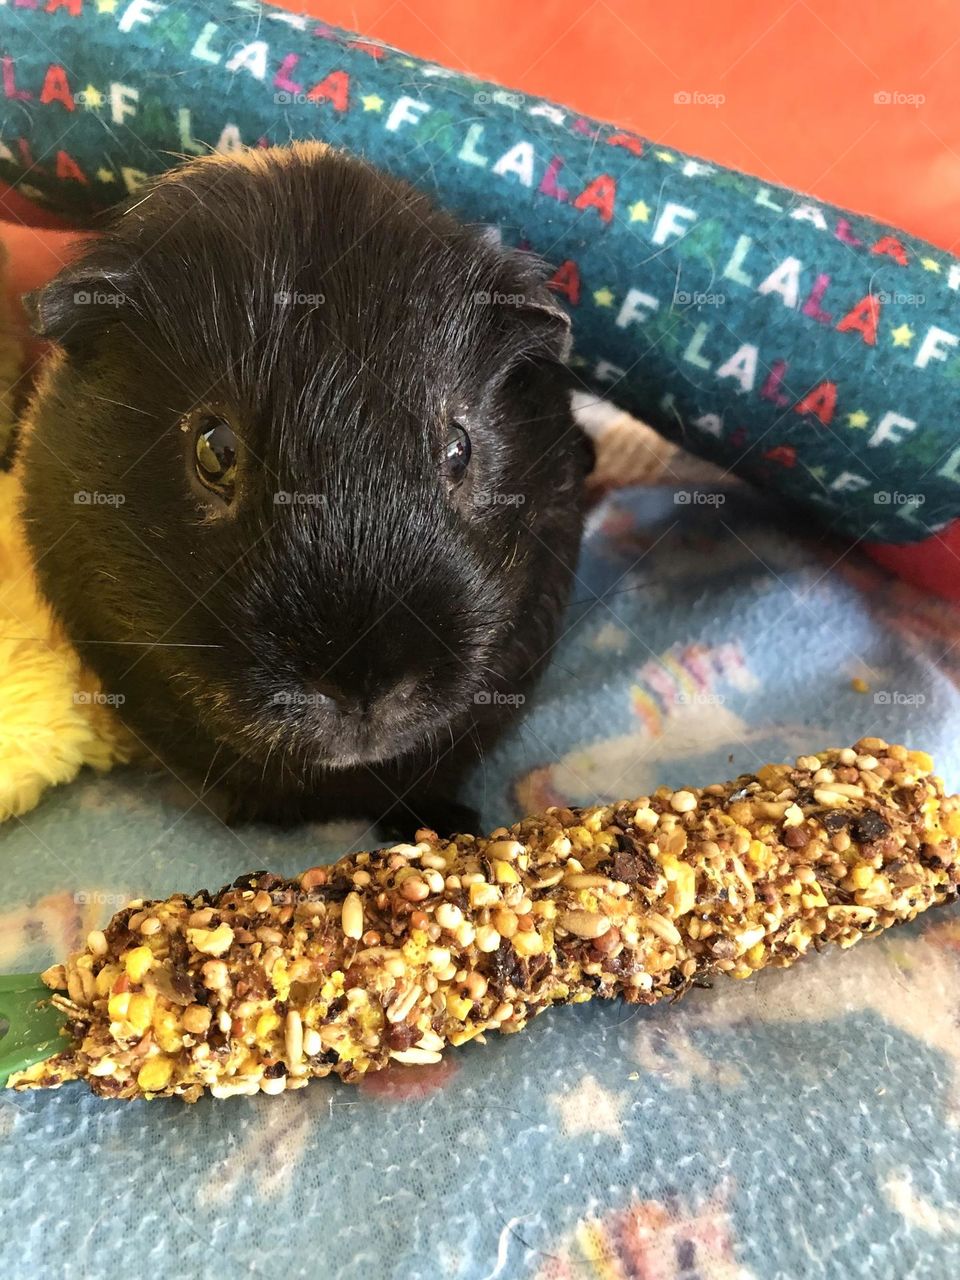 Hungry Guinea piglet Rocky , checking out the honey stick treat 🐾